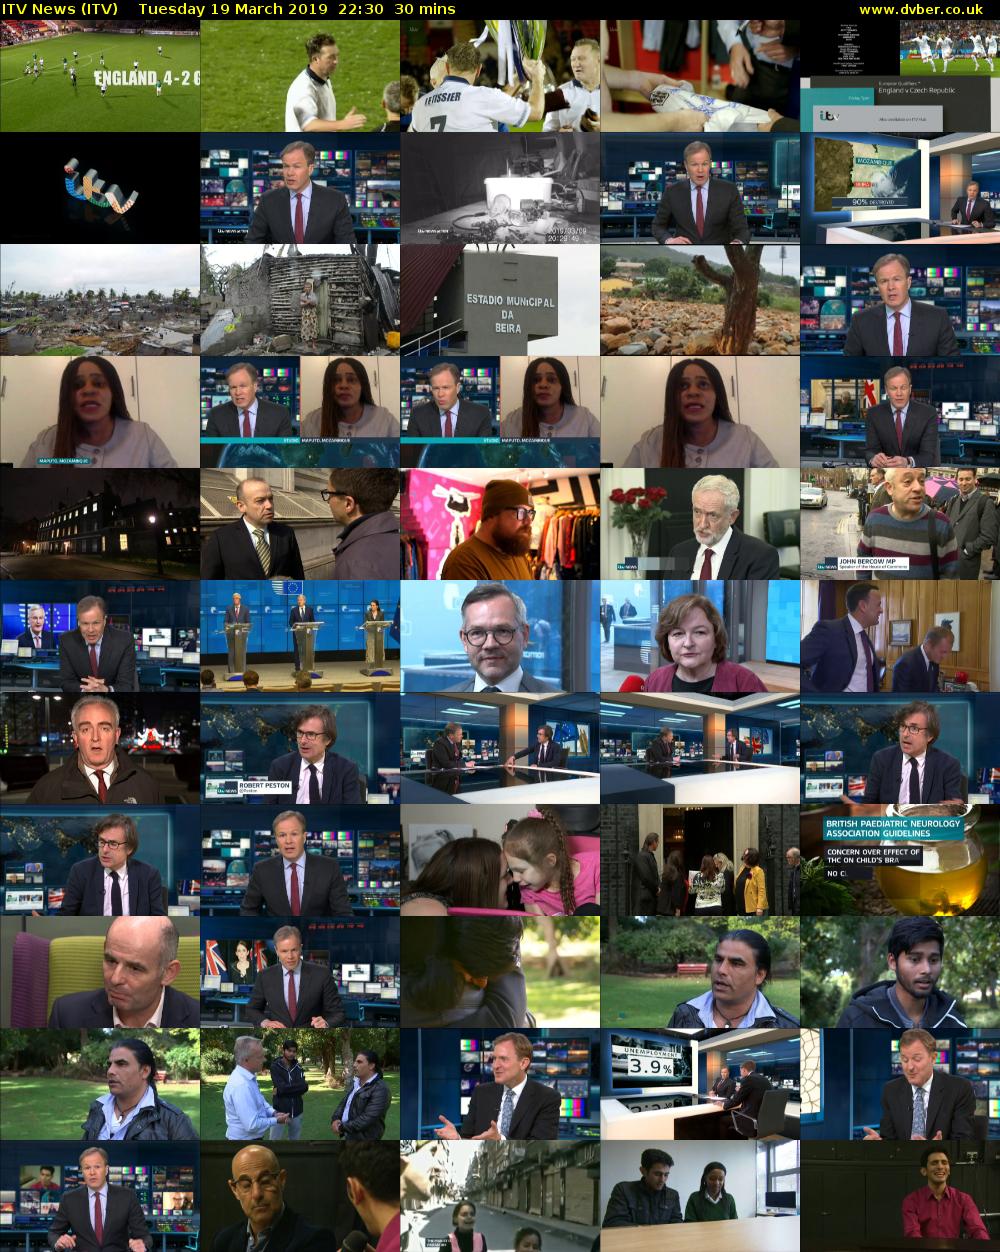 ITV News (ITV) Tuesday 19 March 2019 22:30 - 23:00